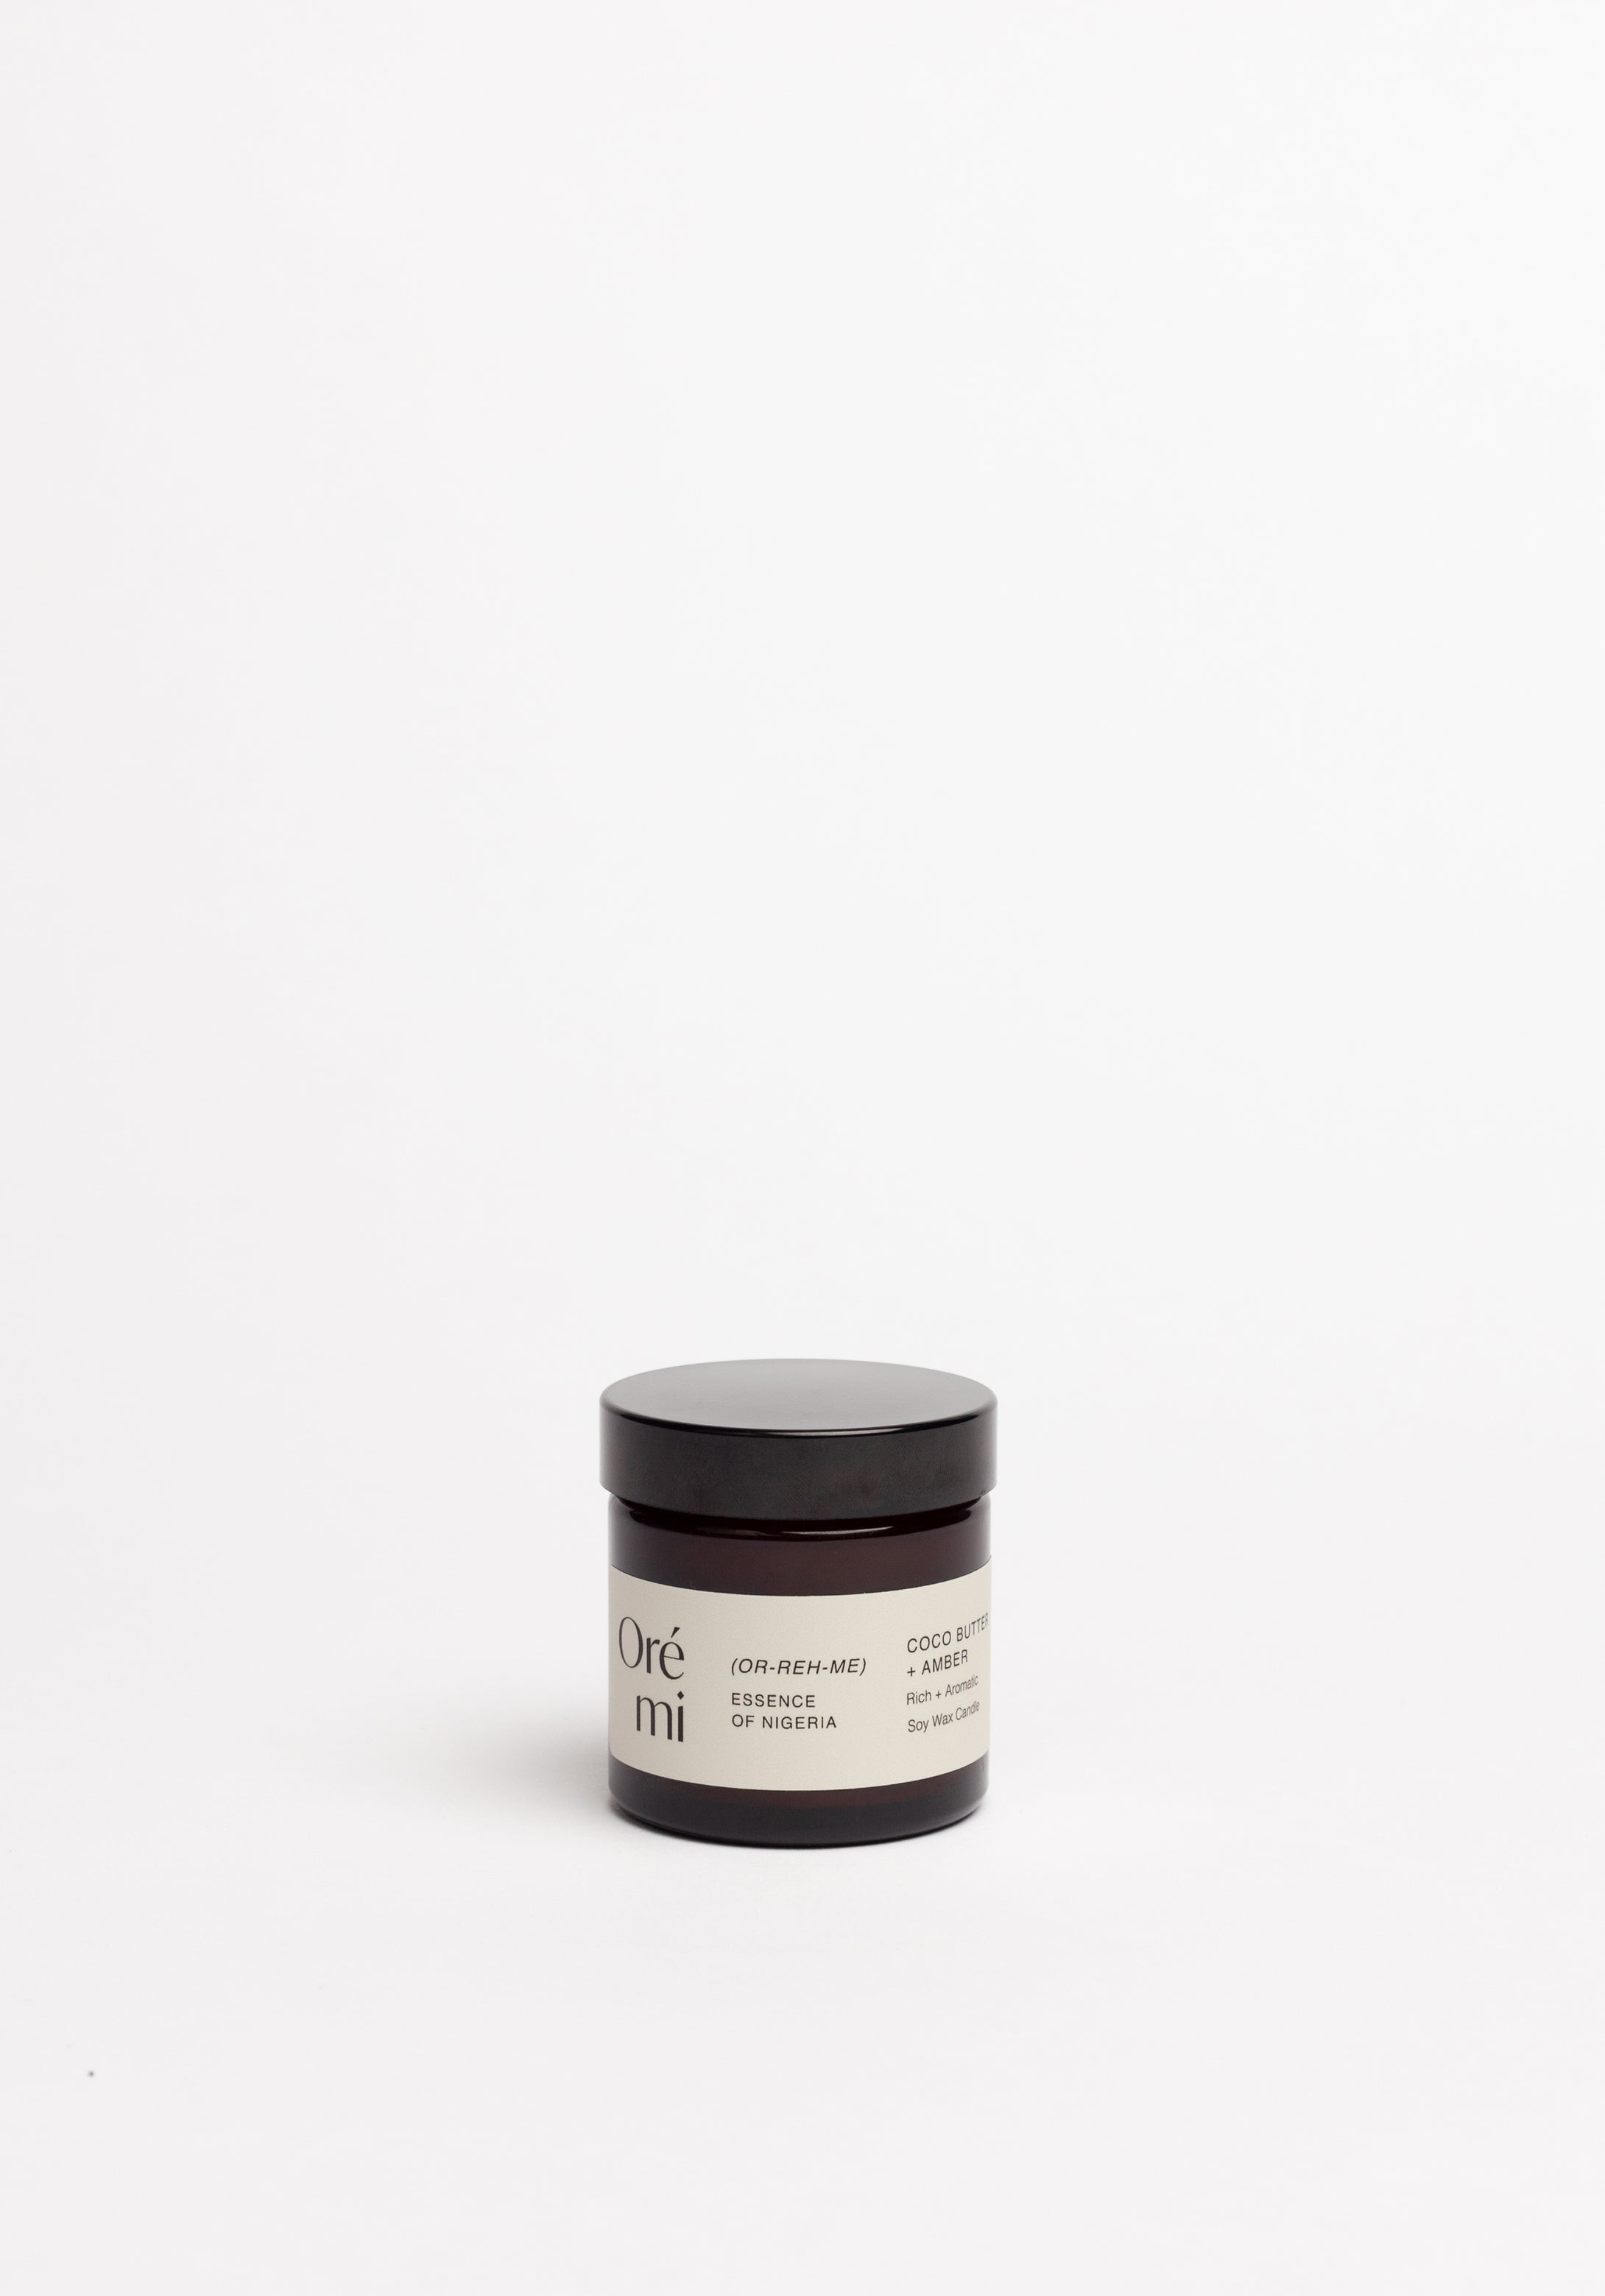 Coco Butter Amber African Nigerian Soy Wax Candle Oré mi Ore mi